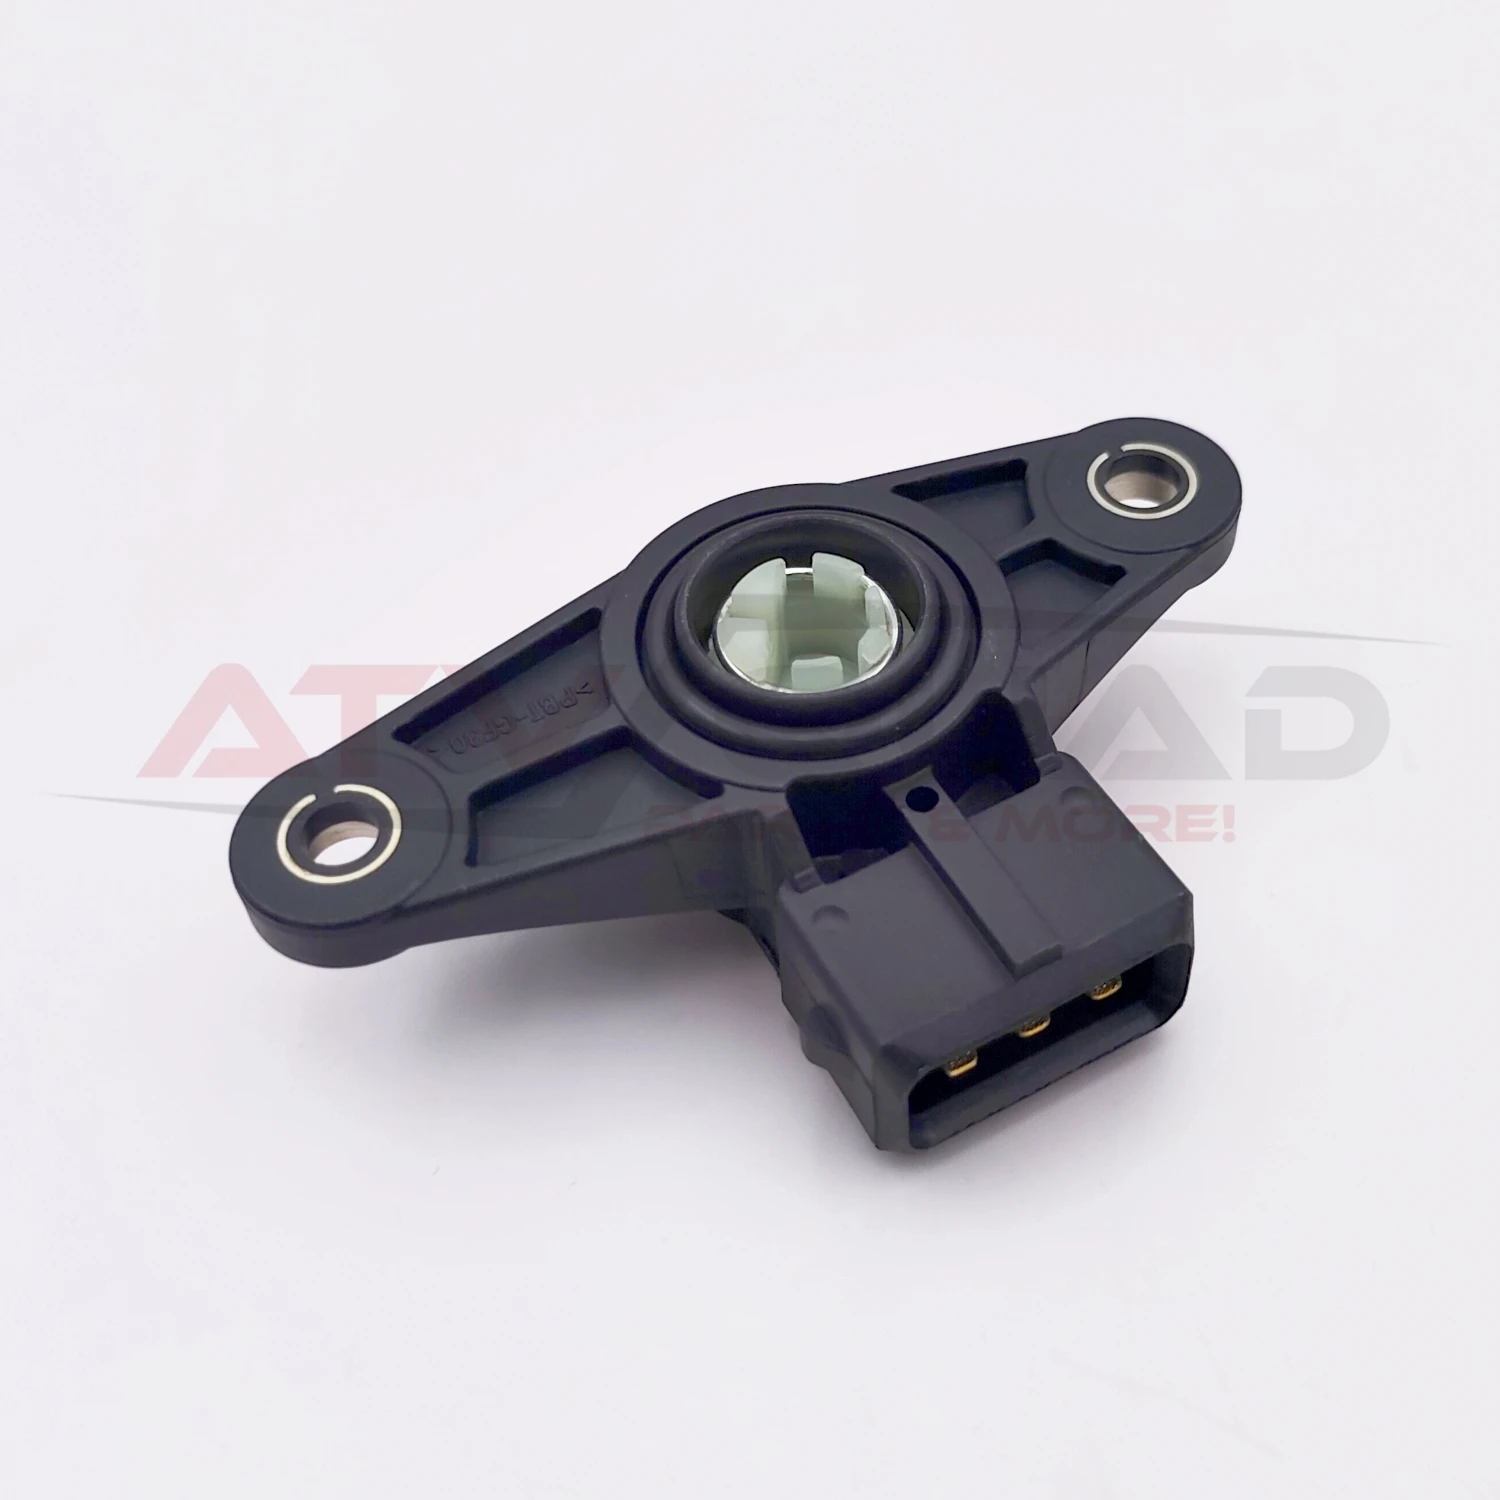 TPS Throttle Position Sensor for CFmoto 400NK 650NK 650MT 650GT Motorcycle 400 450 500S 520 600 Touring 625 ATV motorcycle throttle position sensor tps 18d h5885 00 for ybr125 factor 125 xtz125 ex135